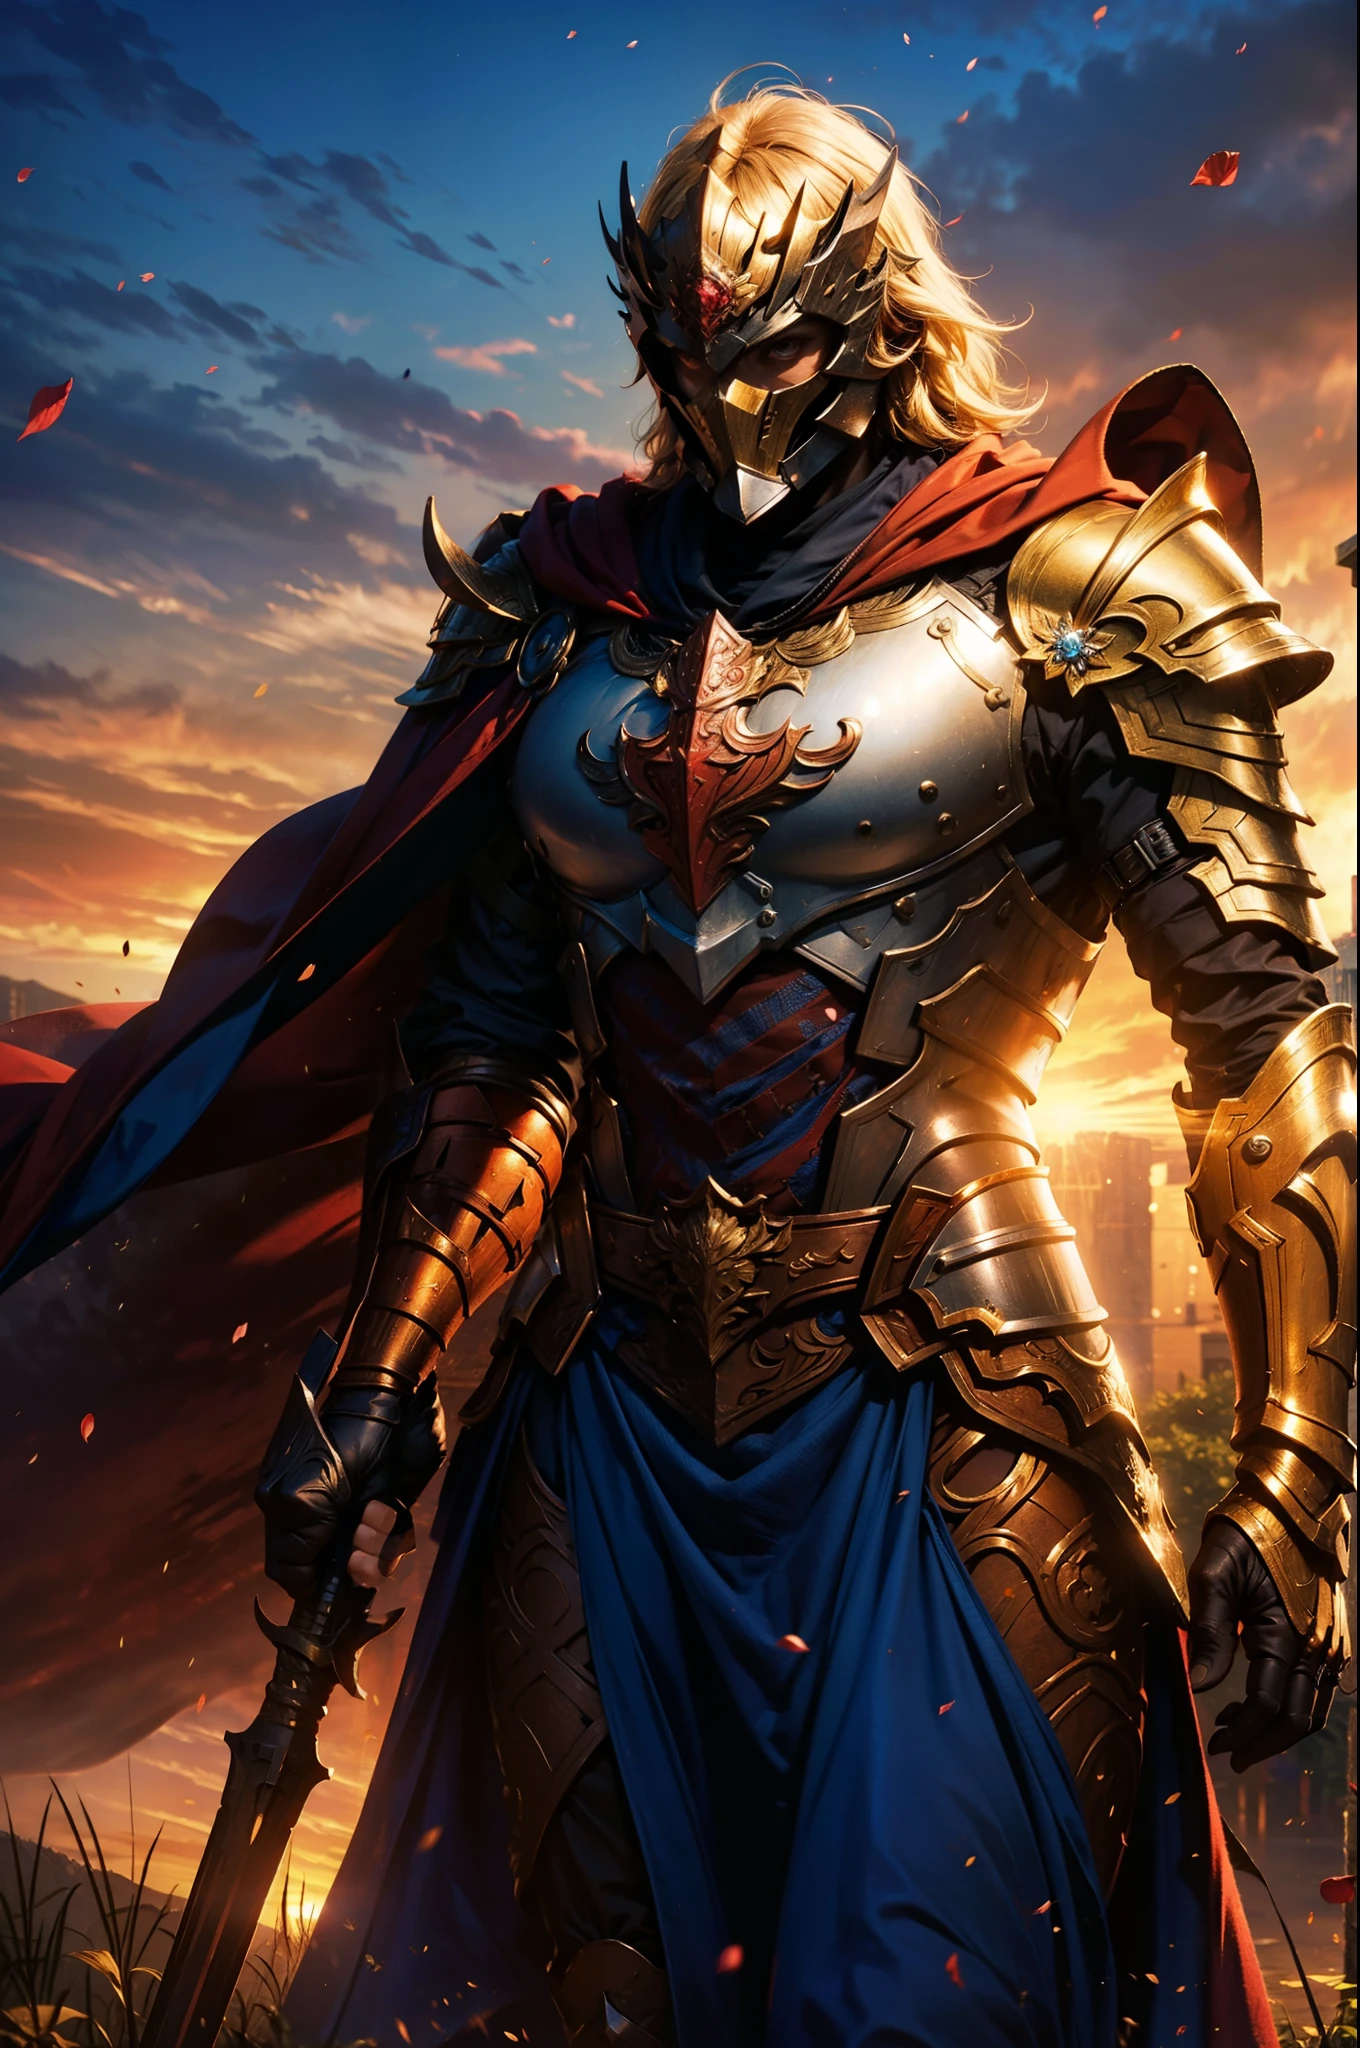 （（Equipped with an oversized and heavy scepter）），Bronze rustic and heavy armor，Extra thick helmet，（The armor has intricate patterns：1.4），blond hairbl，（（The mask is smooth）），Wrap the whole body，（（Red cape）），（（Beautiful royal knights）），Beautiful face，Half-body view，（（Pillar of light）），（（feater）），（（（Rose petals fall：1.4））），frontage，Works of masters，detail in face，super-fine，16K resolution，high qulity，light，High picture detail，Positive perspective，Detailed pubic hair，Epic shooting，oc rendered，tmasterpiece，best qualtiy，high qulity，k hd，High-quality textures，High-quality shadows，high detal，realisticlying，cinematric light，Sideslit，lens flare glow，Ray traching，Sharp focus，